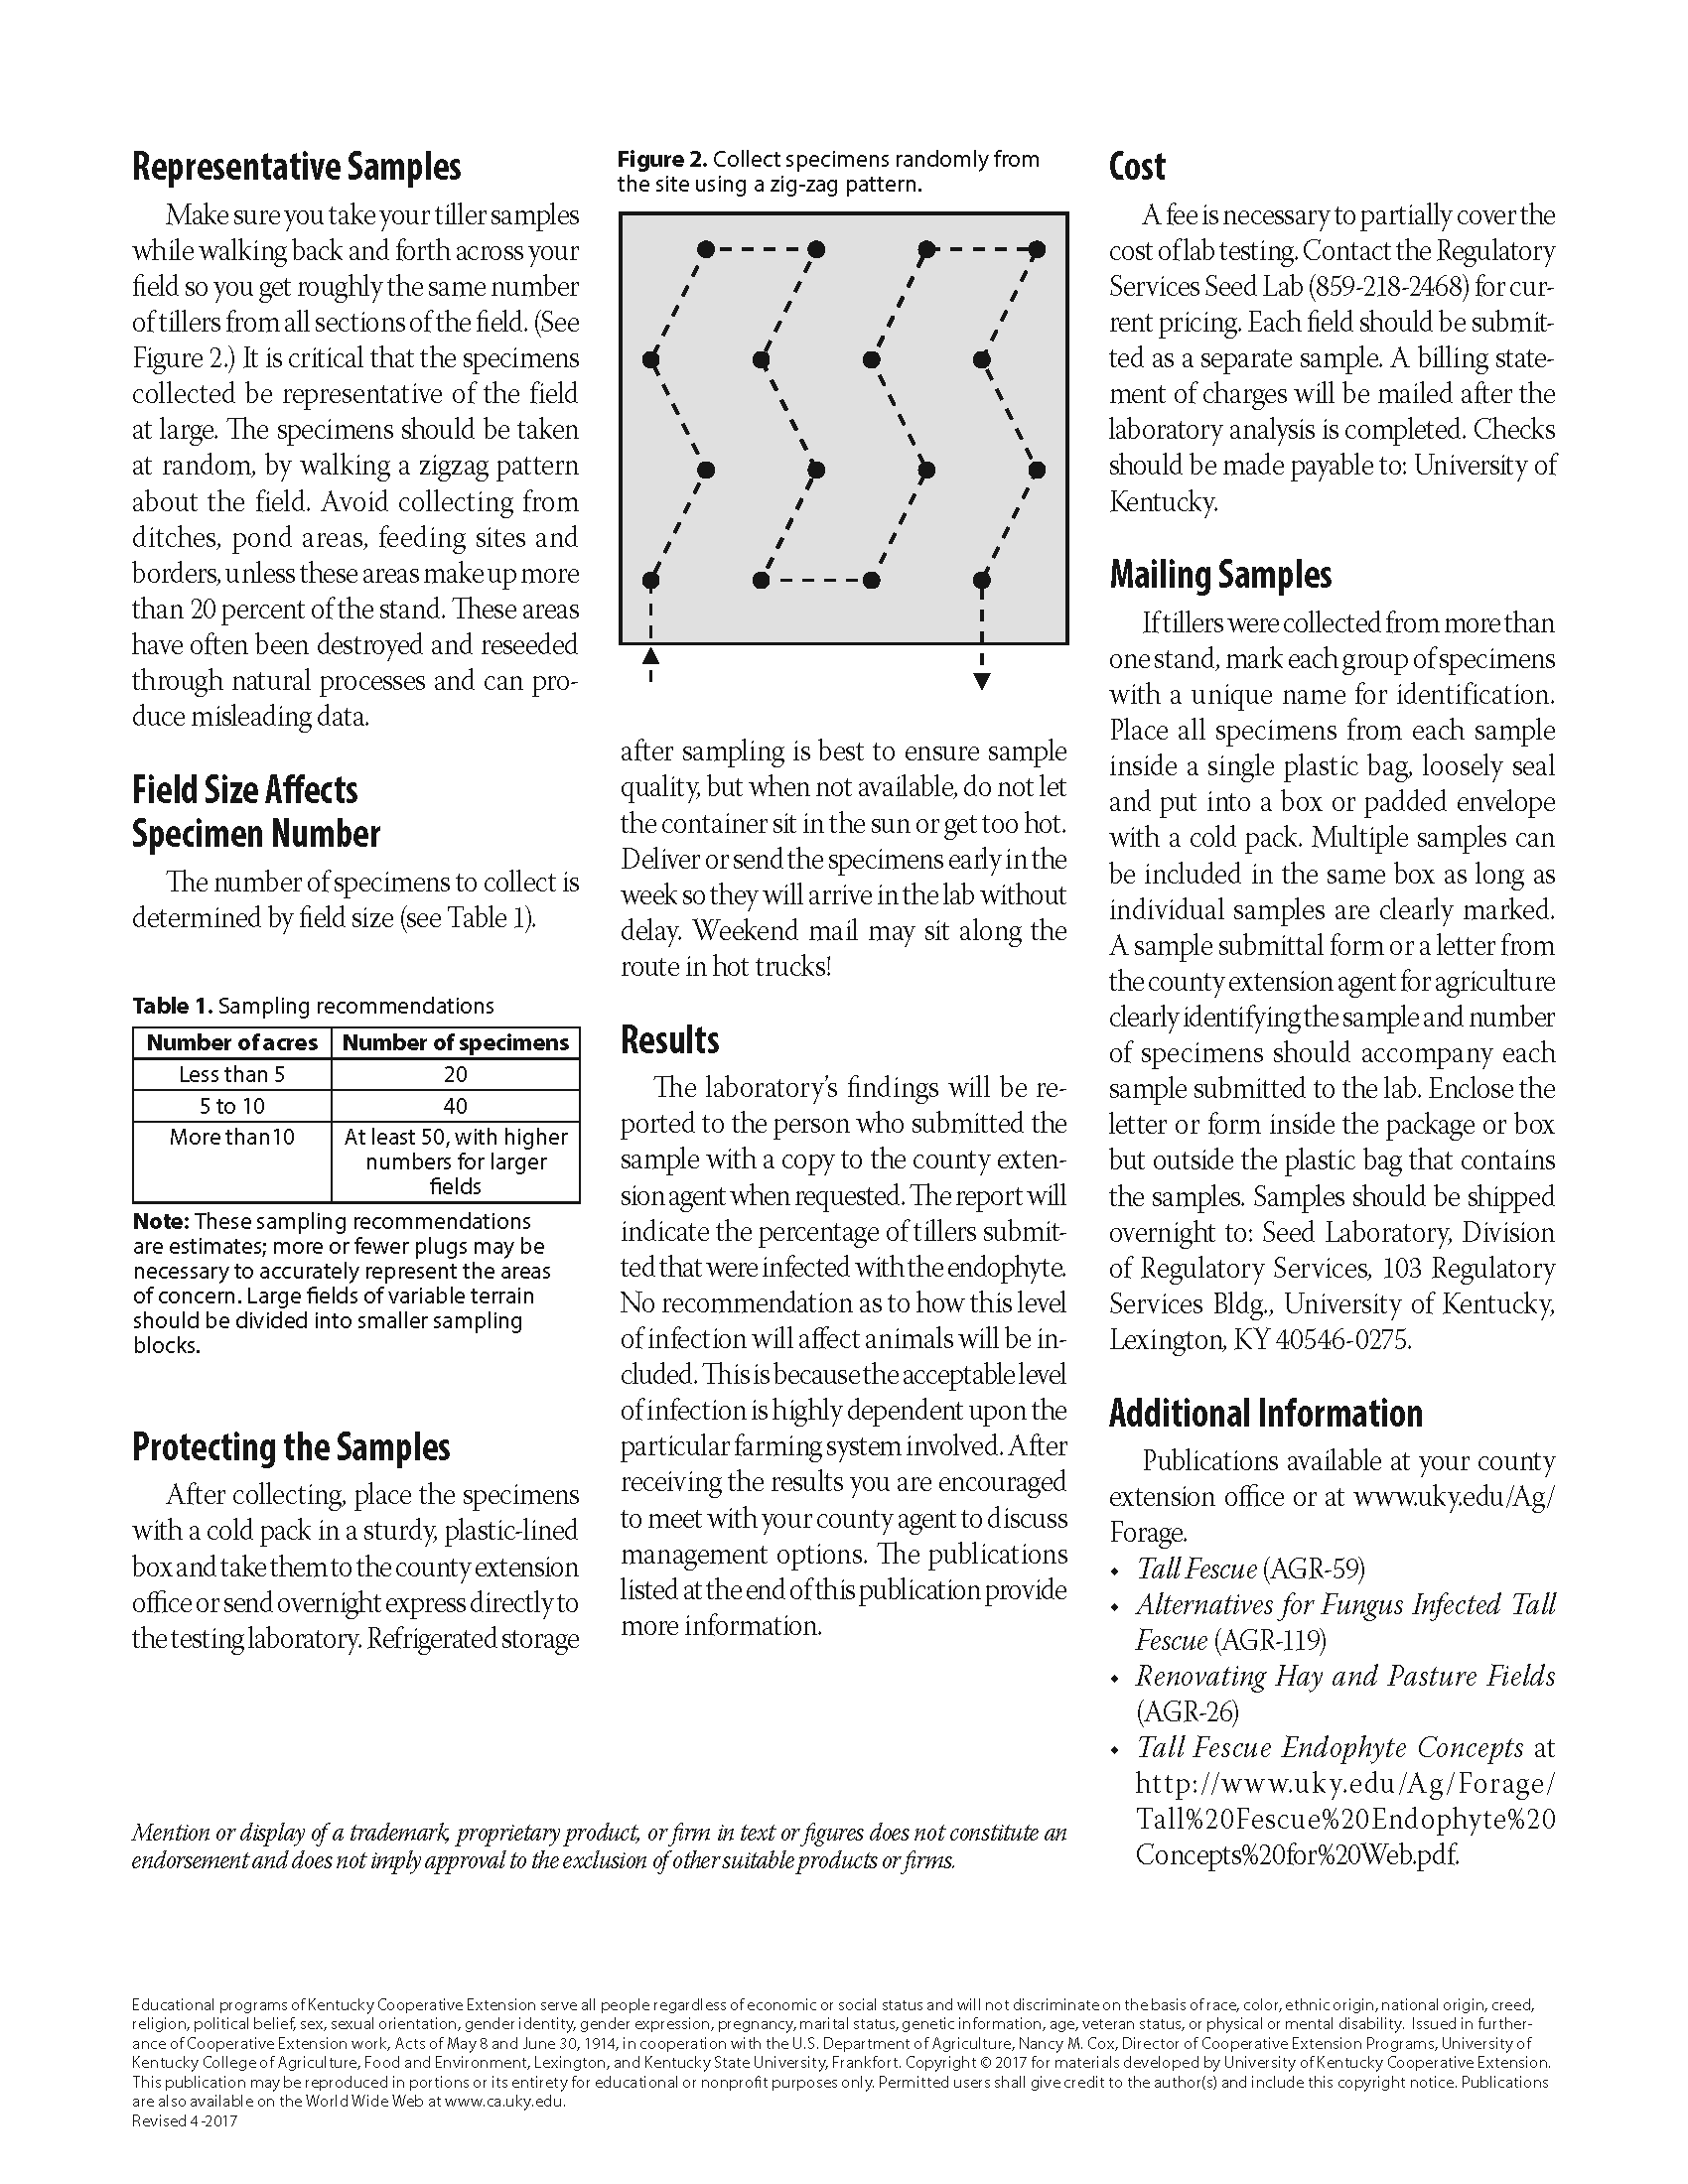 Sampling for Tall Fescue Endophyte in Pasture or Hay Stands publication page 2